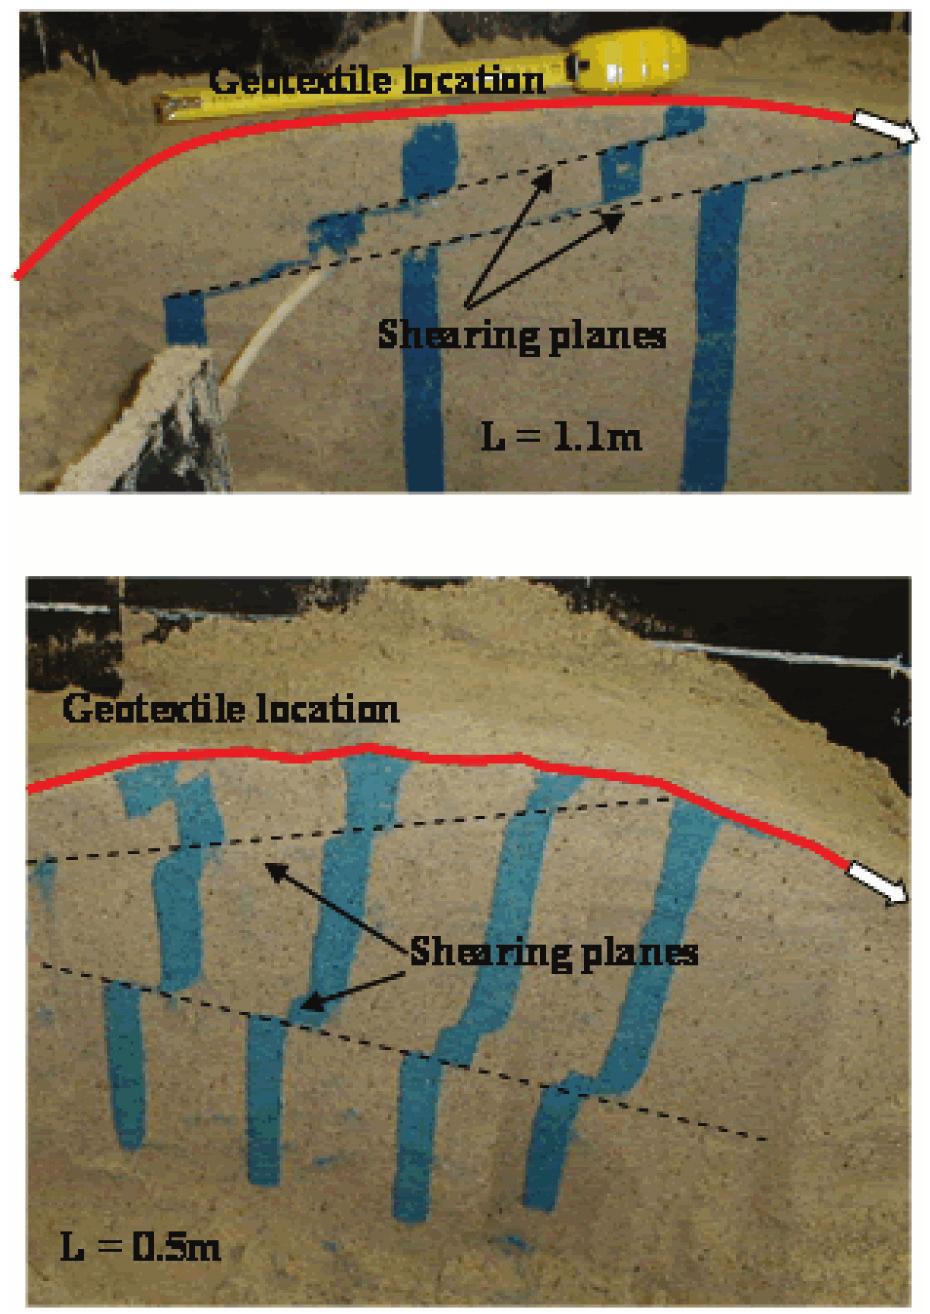 7): For L = 1.1 m, there is a localized sliding plane in the sand under the geotextile. For L = 0.5 m, the soil mass moves and there are many shearing planes. For the same anchor in silt for L = 1.